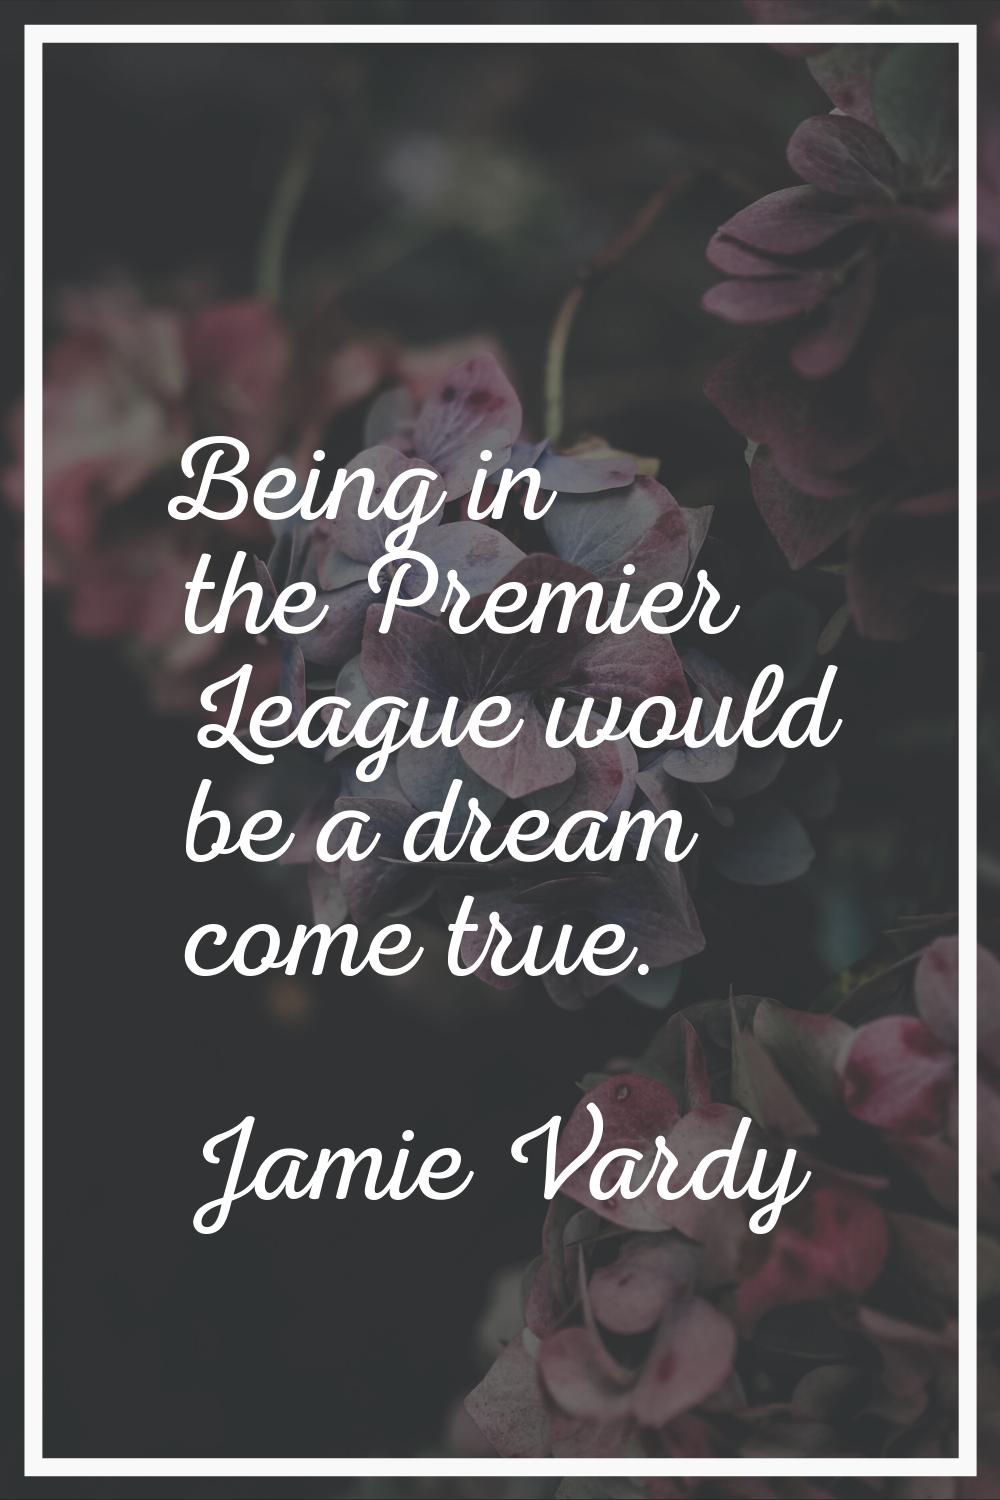 Being in the Premier League would be a dream come true.